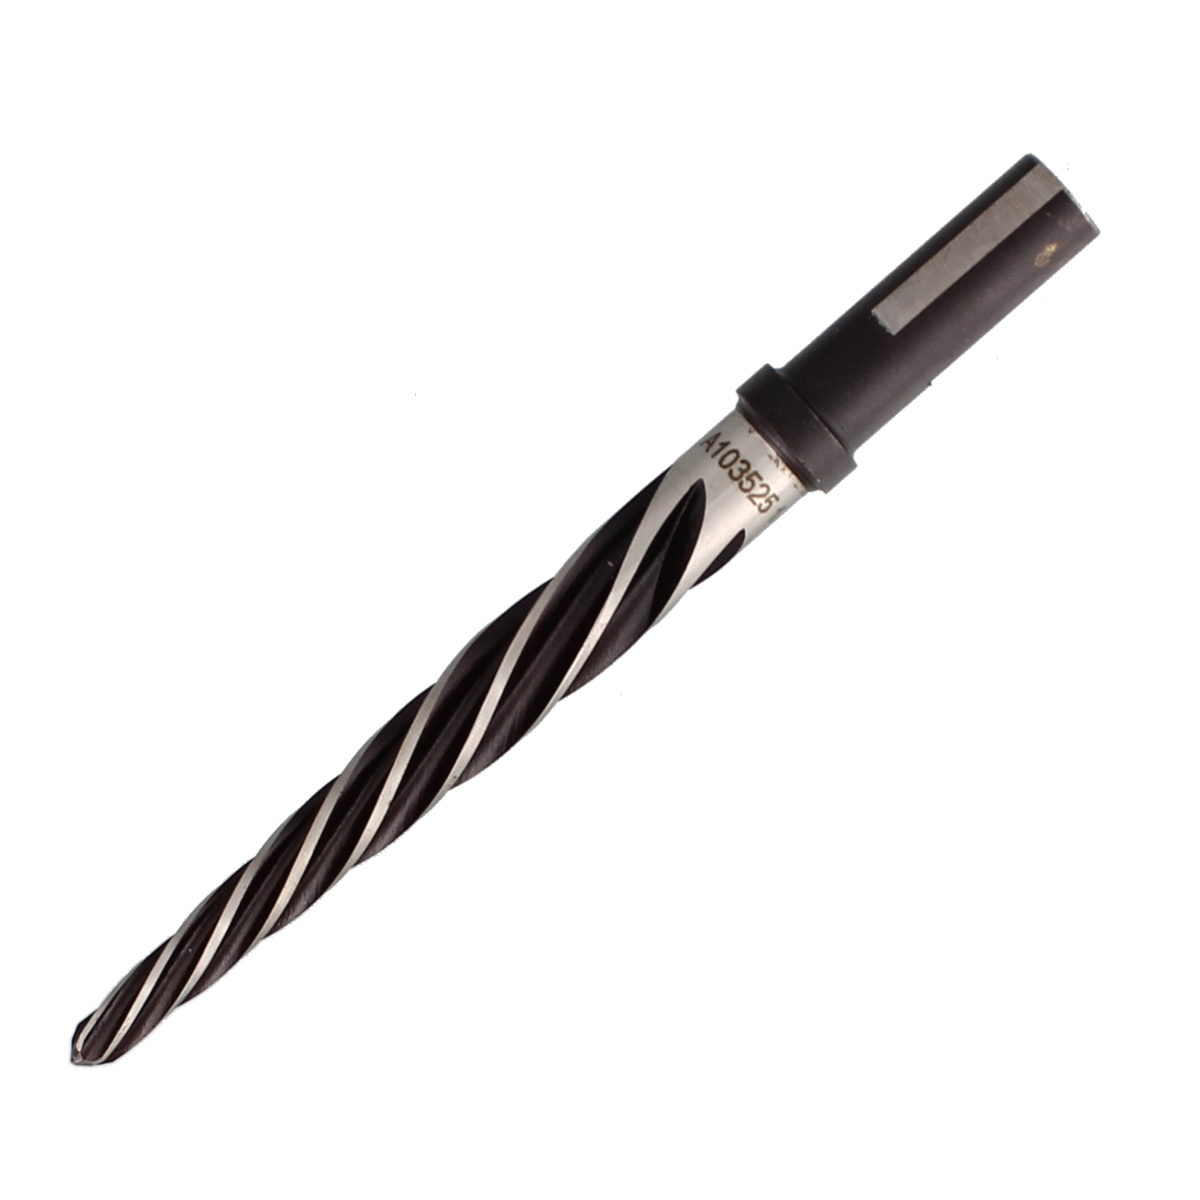 1/2" Construction Taper Reamer with Stop Collar